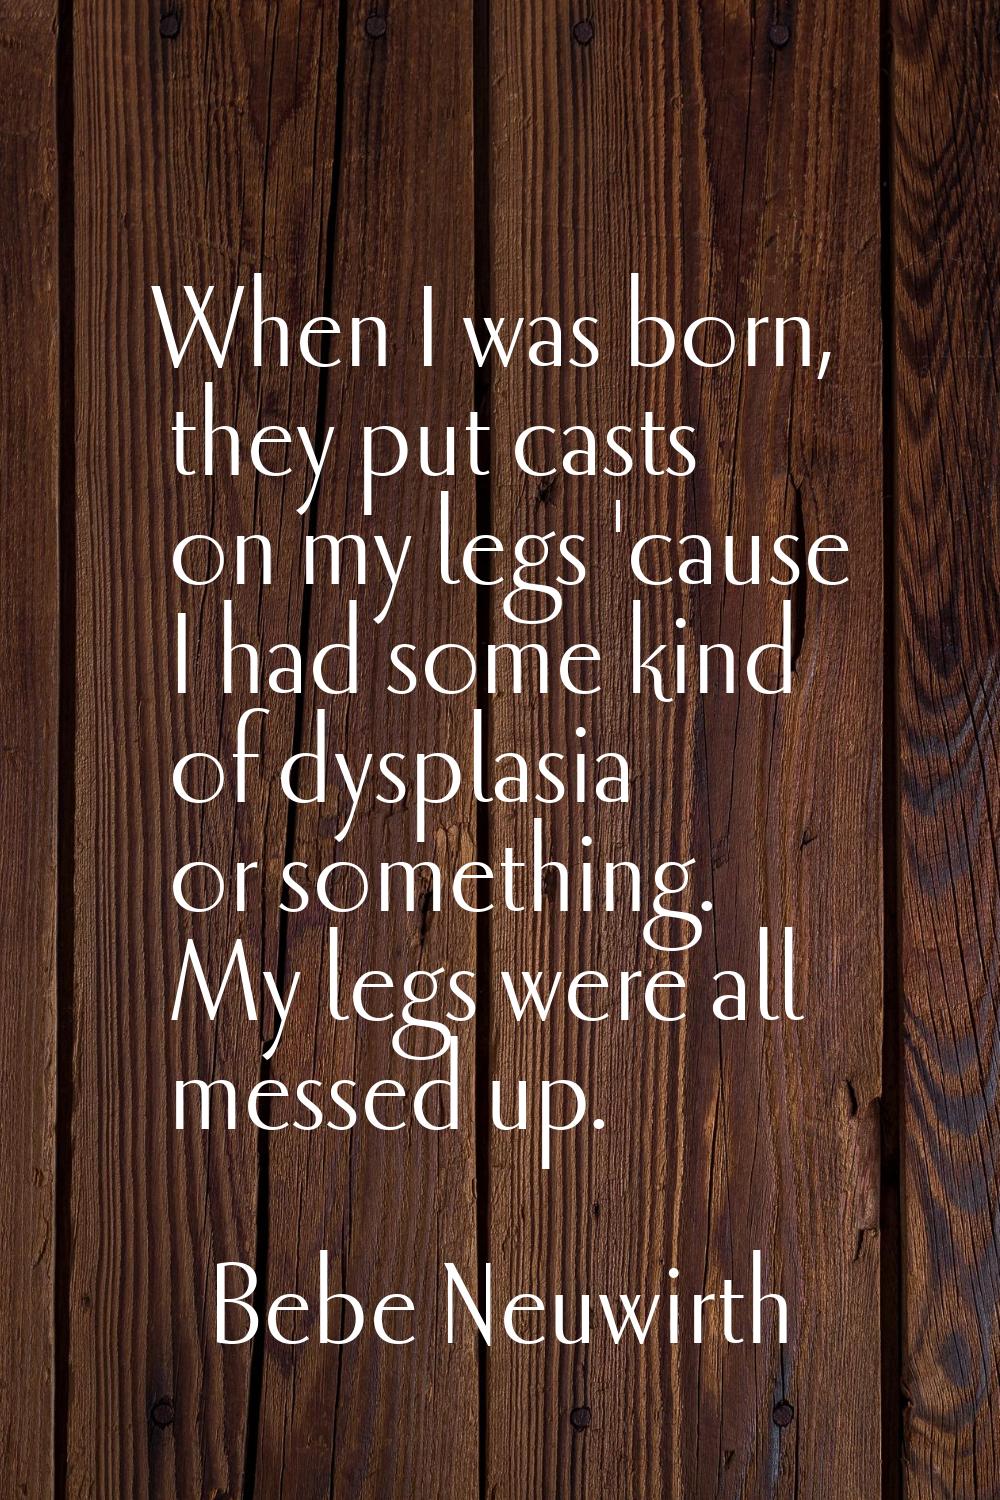 When I was born, they put casts on my legs 'cause I had some kind of dysplasia or something. My leg